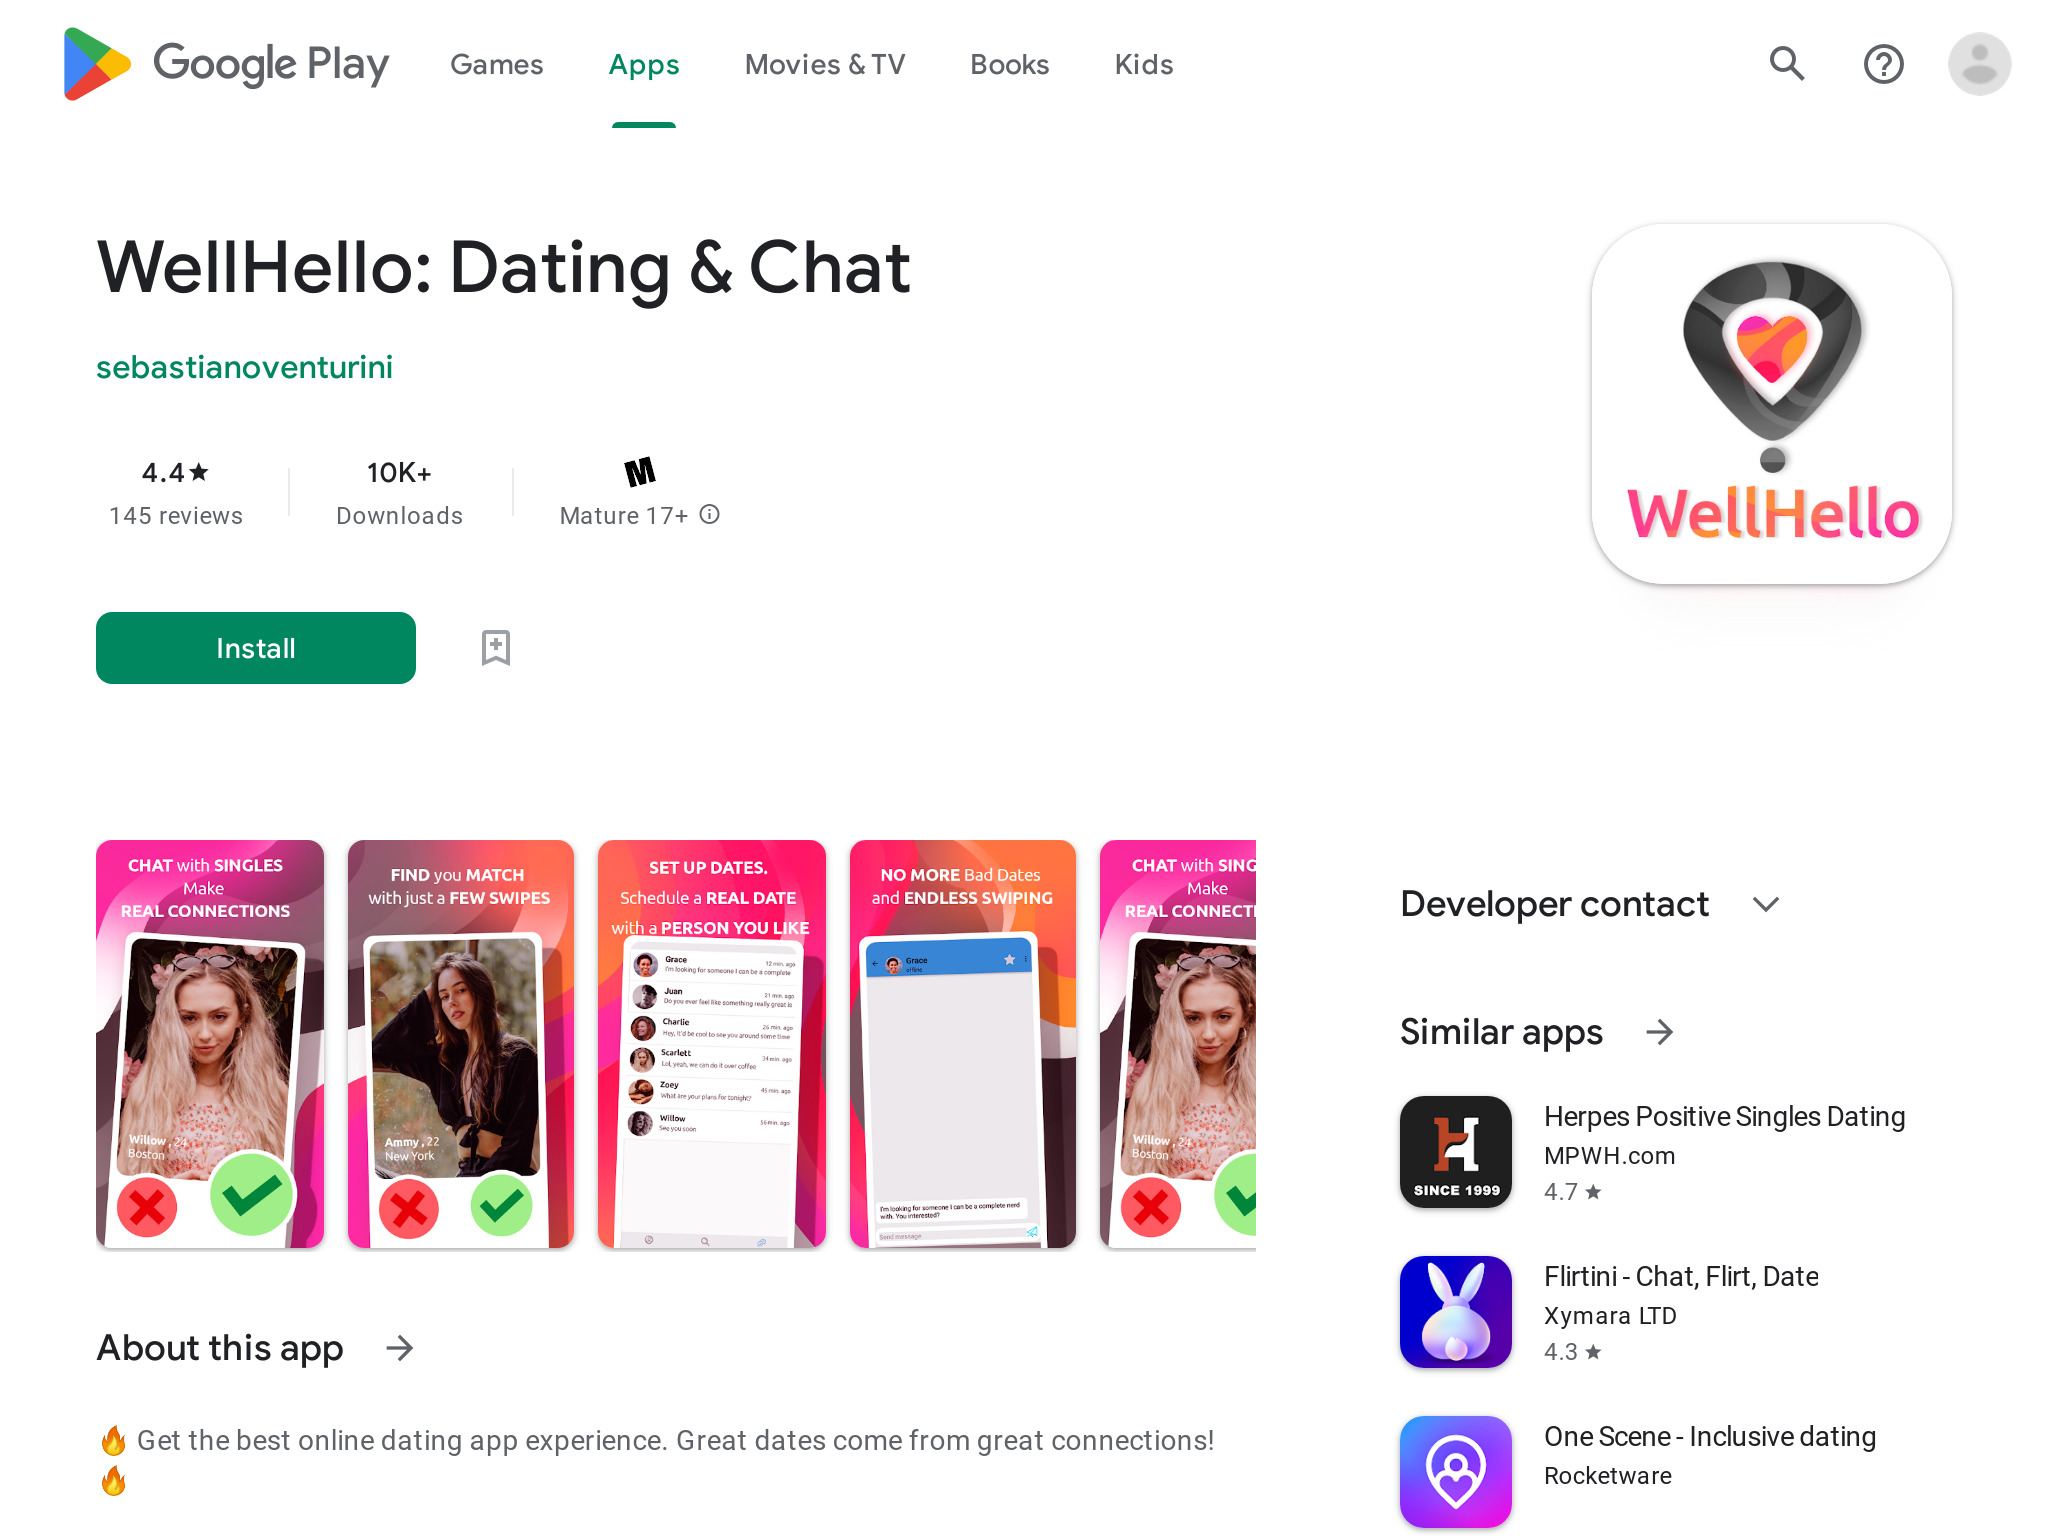 WellHello Review: Does It Deliver What It Promises?